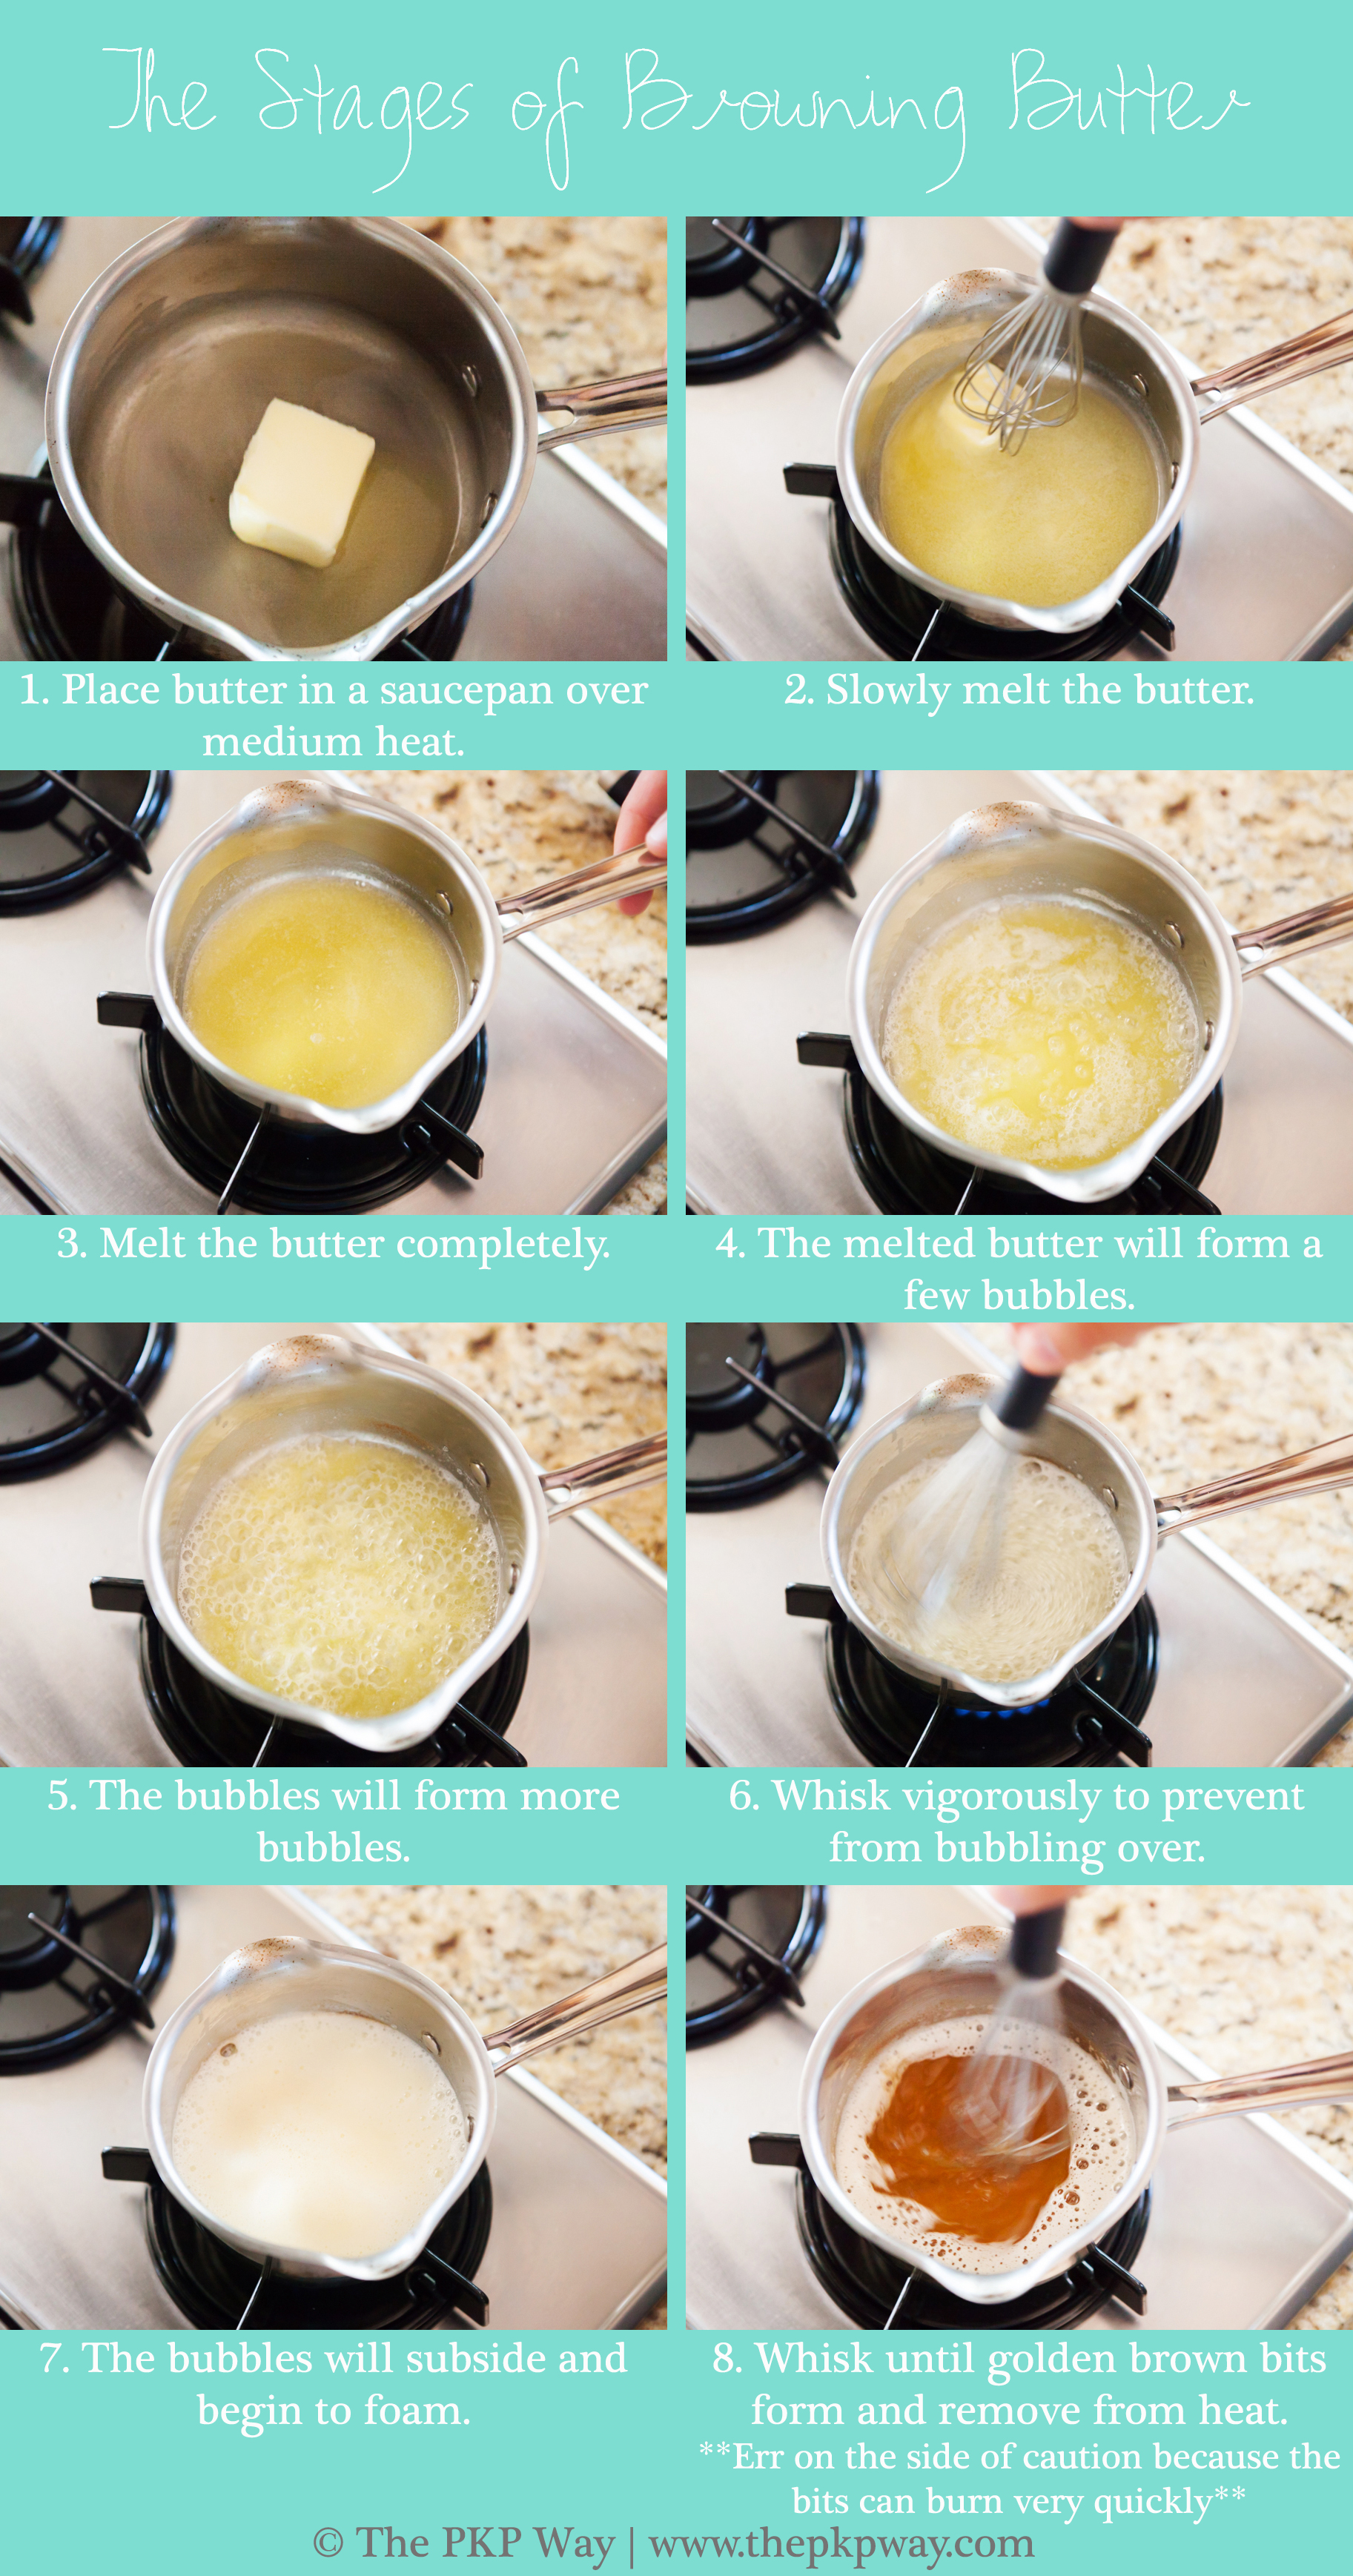 The Stages of Browning Butter